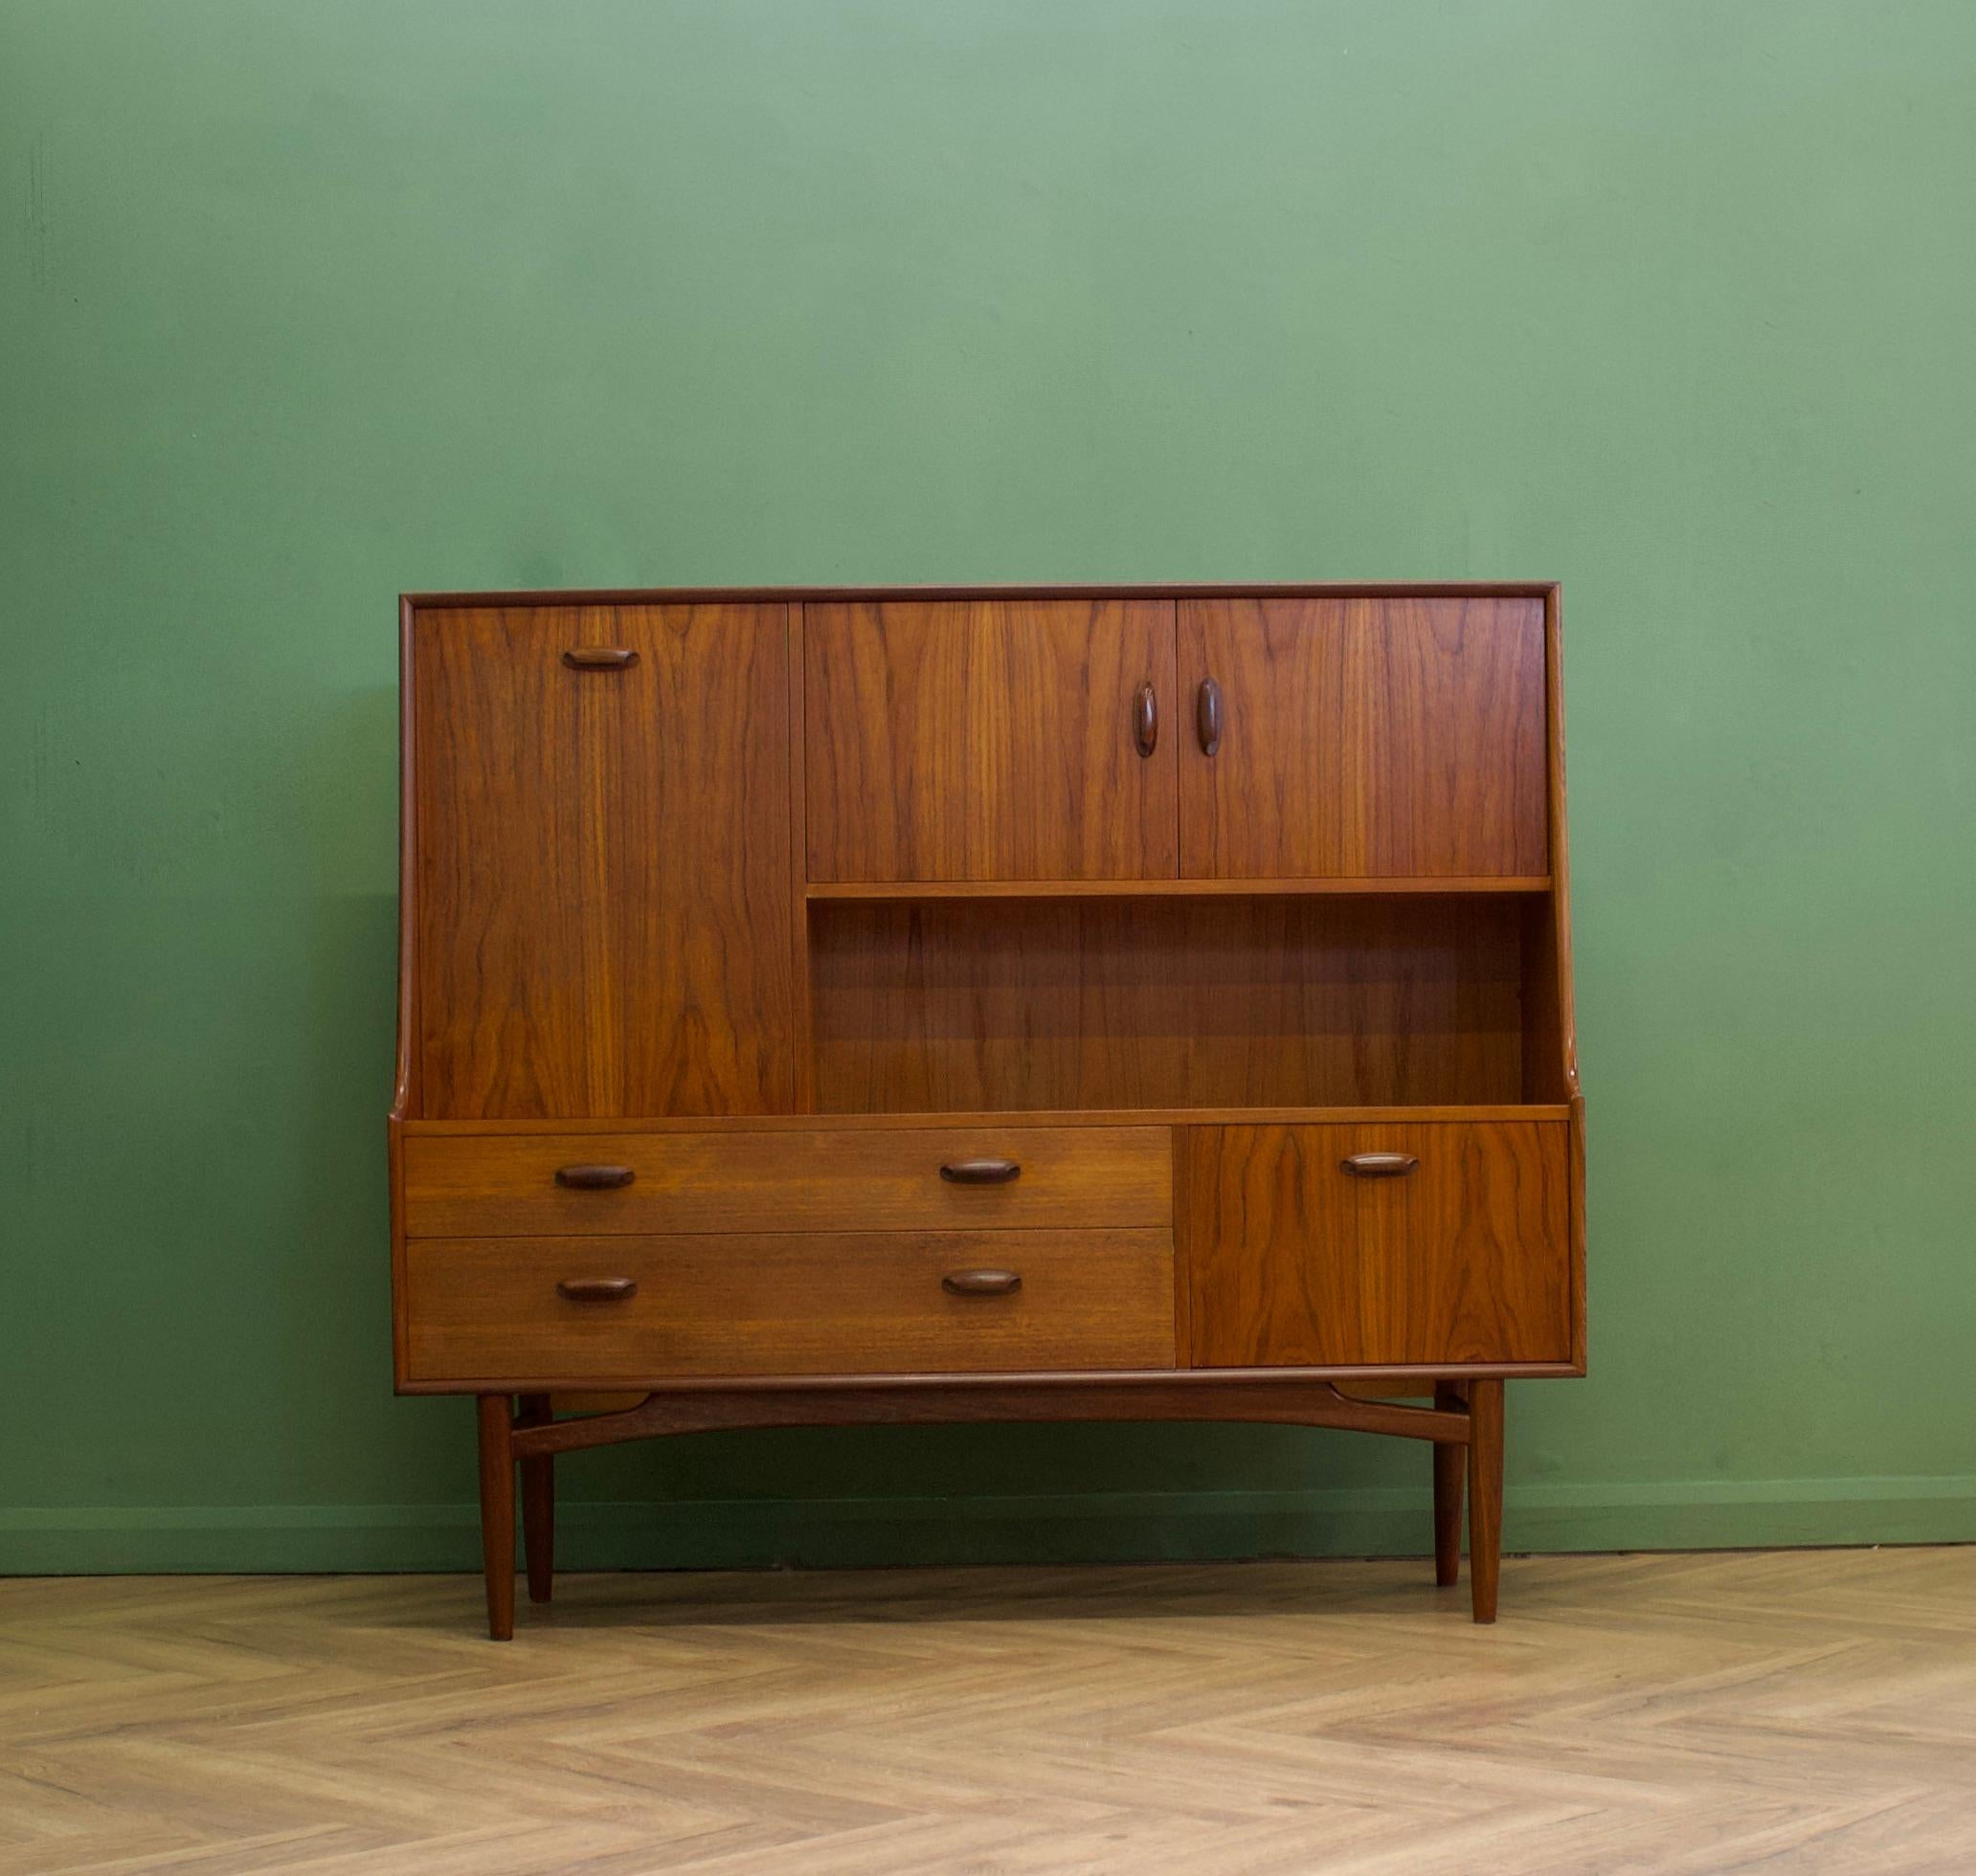 A compact size teak drinks cabinet or highboard from G Plan - Circa 1960s

It features a two cupboards, a pull down drinks compartment, two drawers and removable shelves

Each handle is solid teak